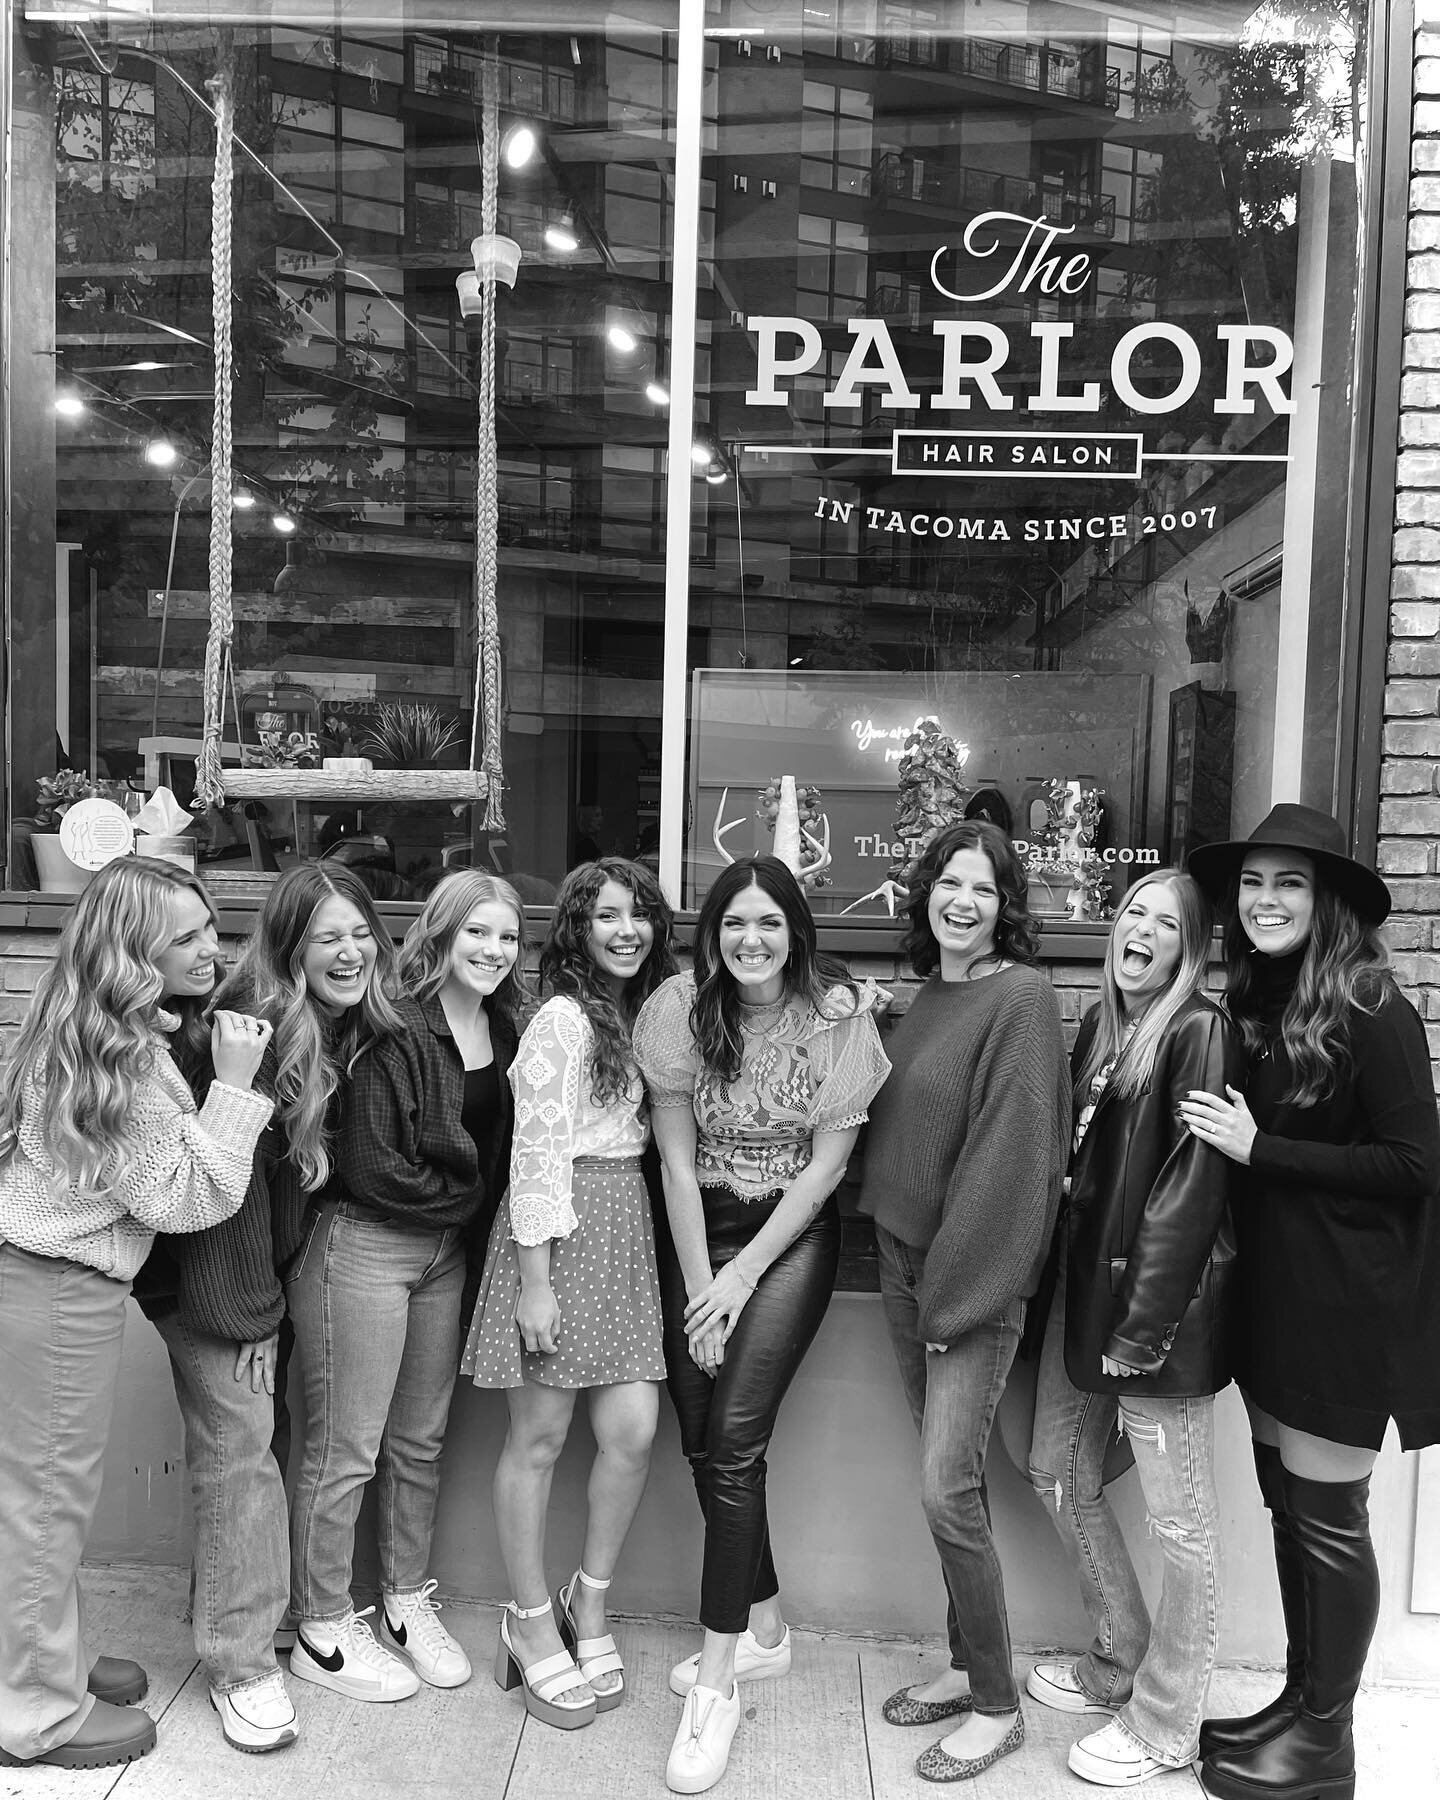 What an amazing party we had two weeks ago! It definitely was a success. We can&rsquo;t wait to host another party for y&rsquo;all! Thanks to everyone who came out + everyone who set up a station here at The Parlor. We love you guys! 🫶🏼 
-
-
-
-
-
